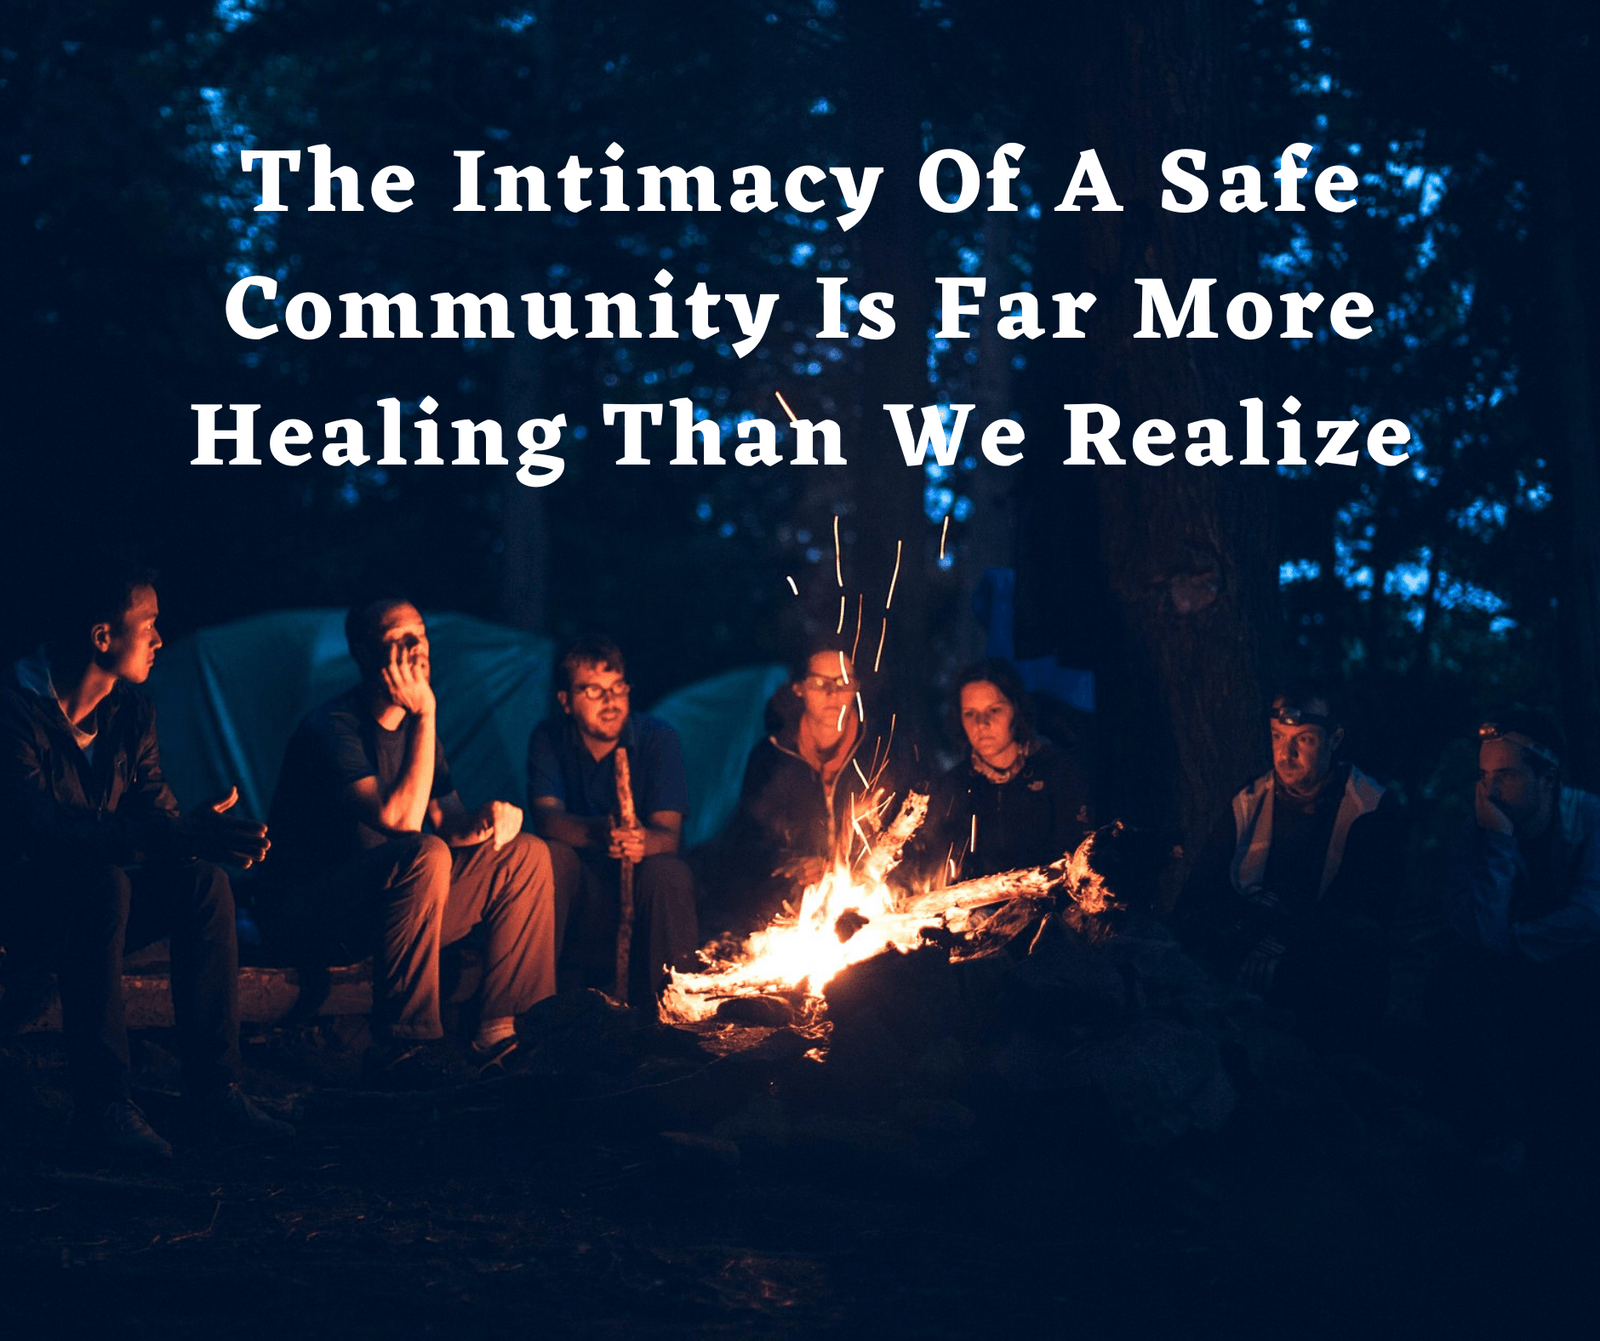 The Intimacy Of A Safe Community Is Far More Healing Than We Realize